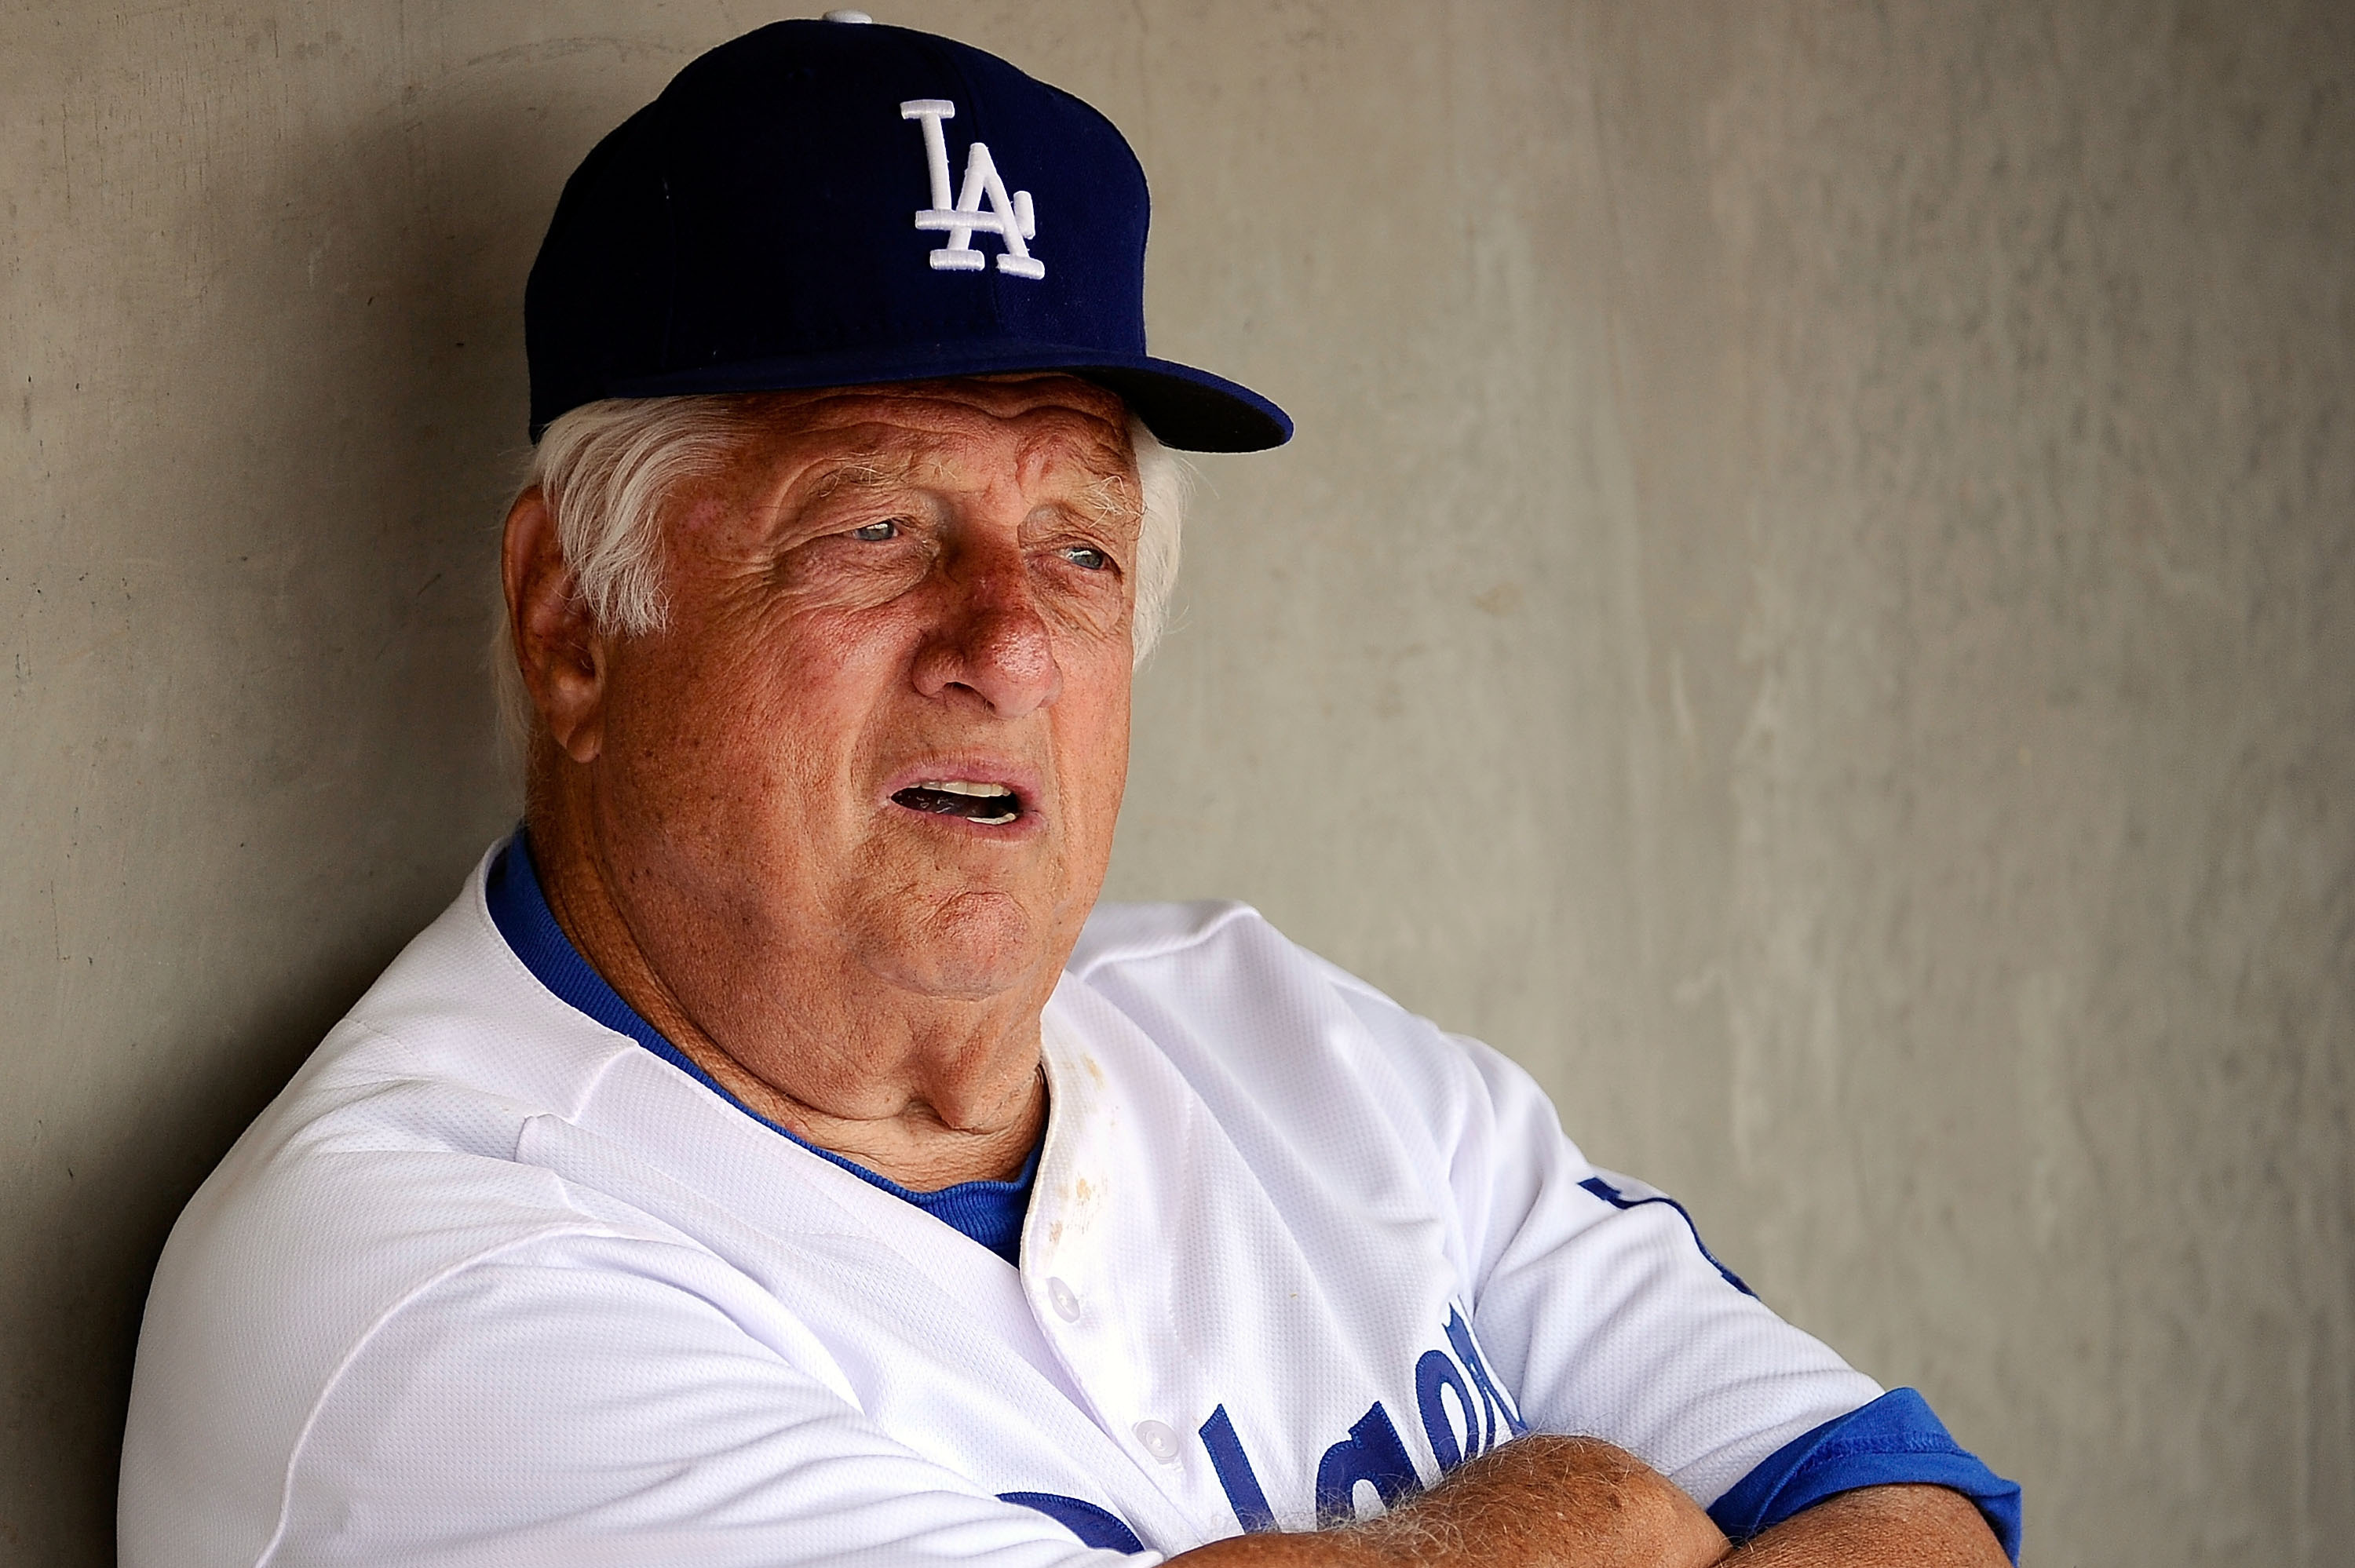 10 greatest Dodgers players of all time, ranked